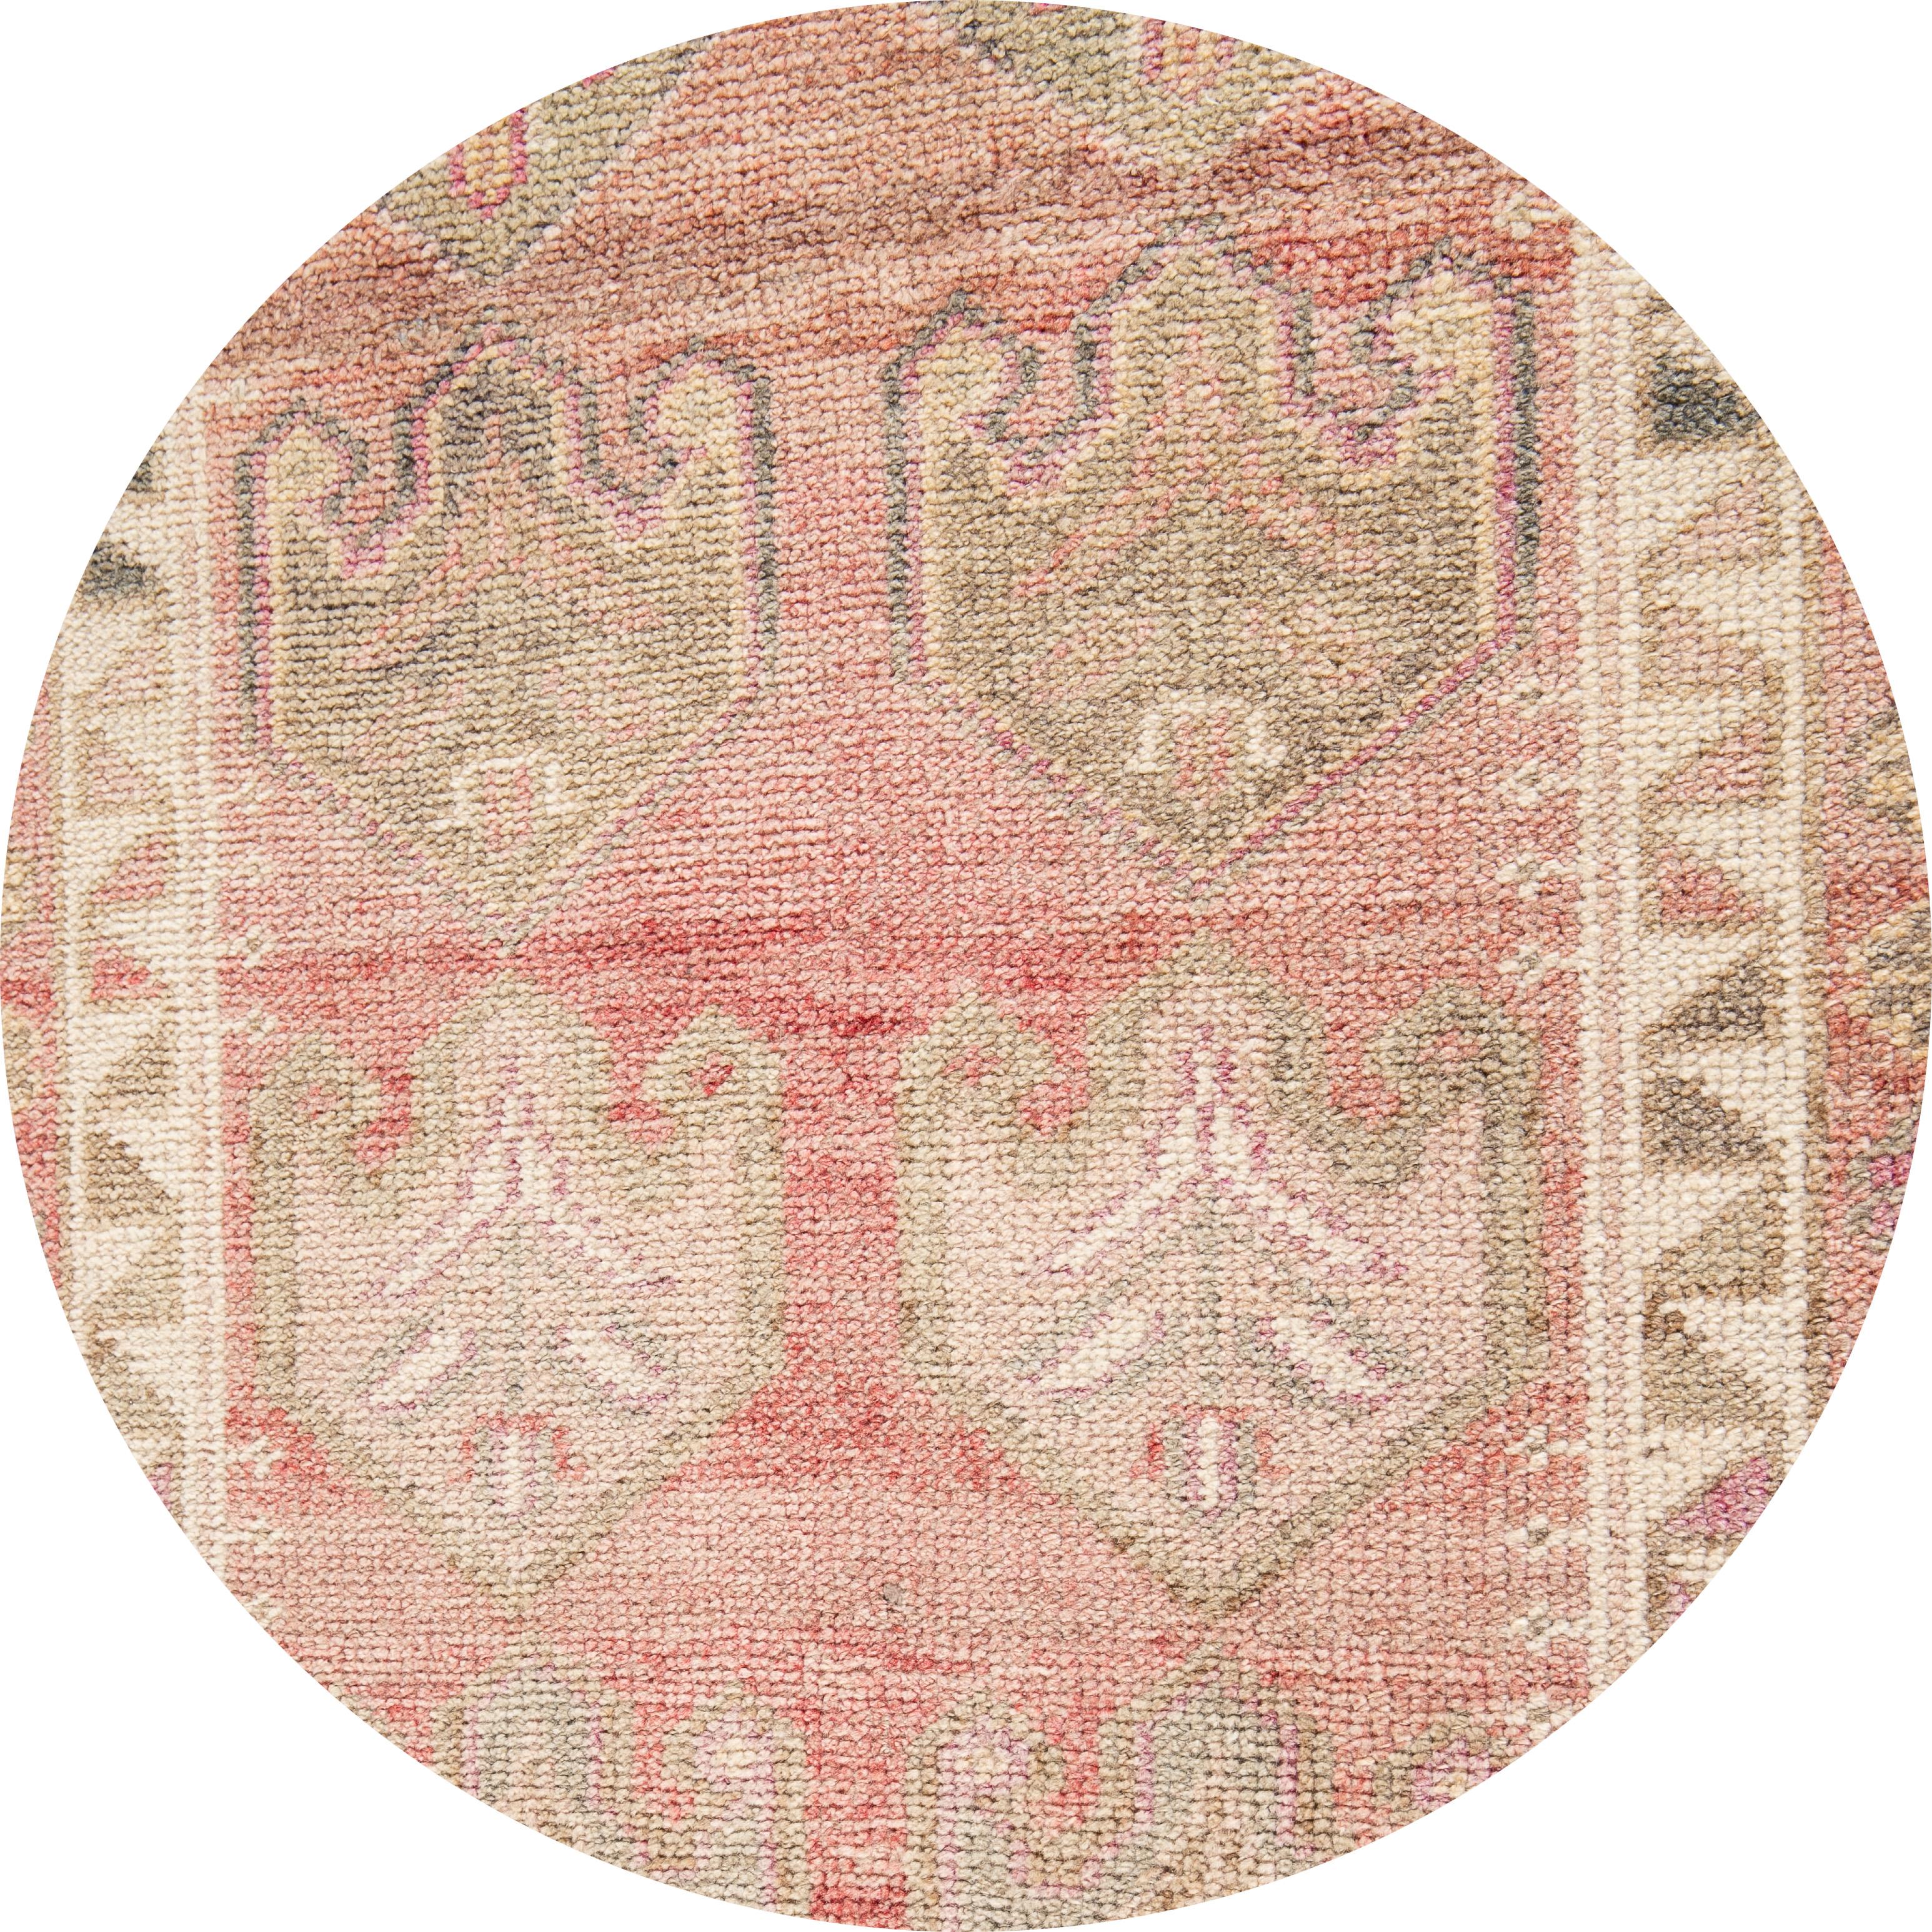 Beautiful vintage runner rug, hand knotted wool with a blush field, pink and gray accents in multi medallion design.
This rug measures 2' 10